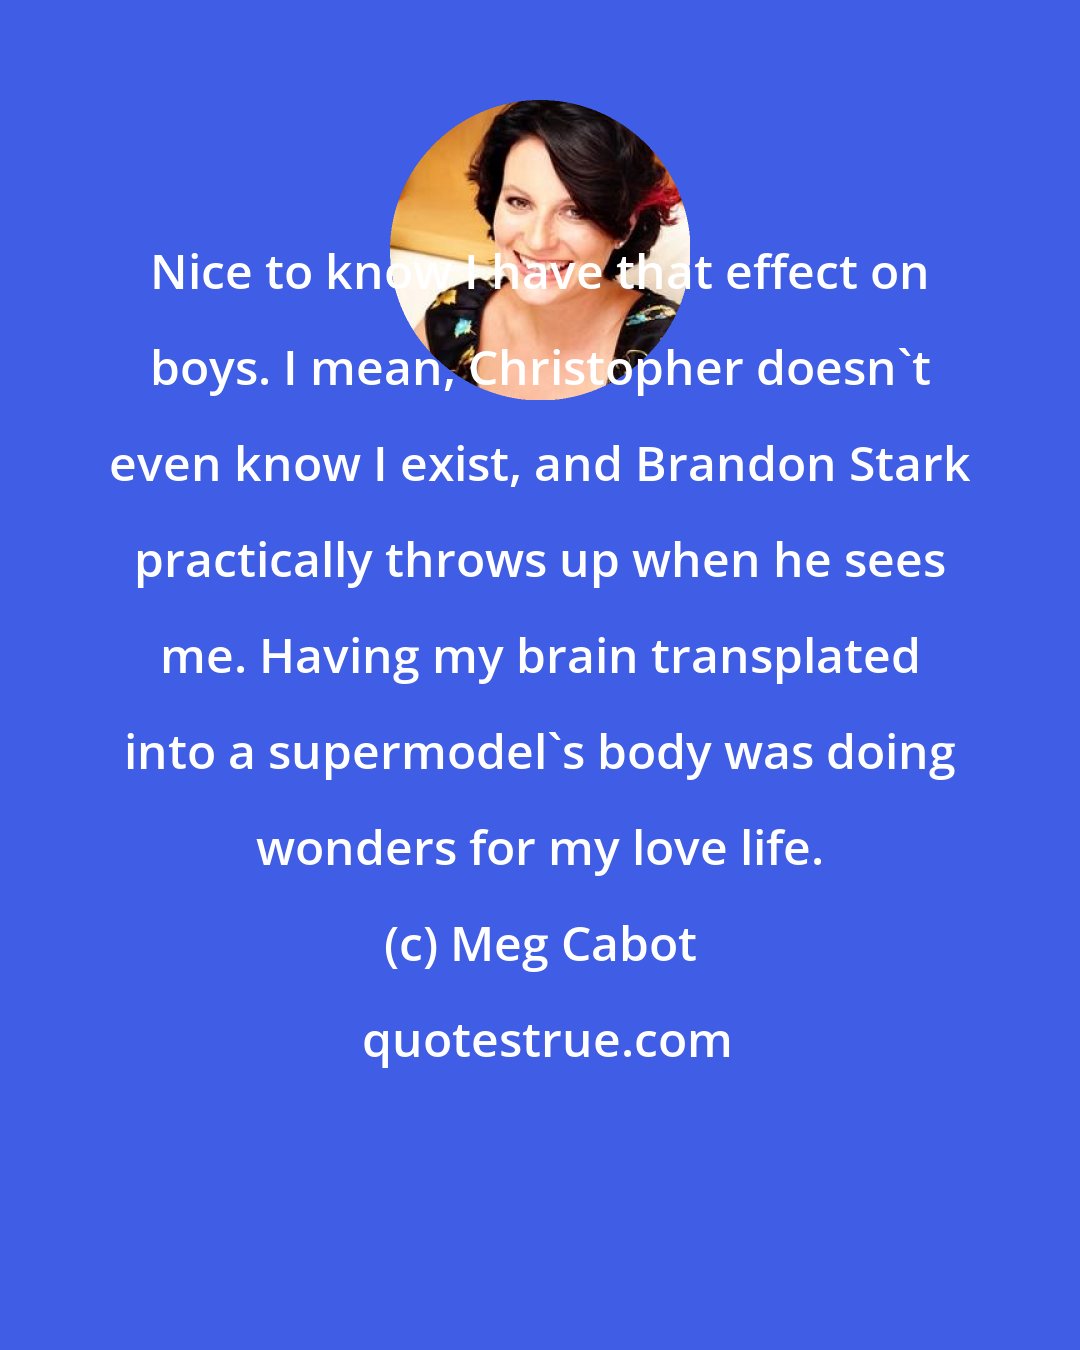 Meg Cabot: Nice to know I have that effect on boys. I mean, Christopher doesn't even know I exist, and Brandon Stark practically throws up when he sees me. Having my brain transplated into a supermodel's body was doing wonders for my love life.